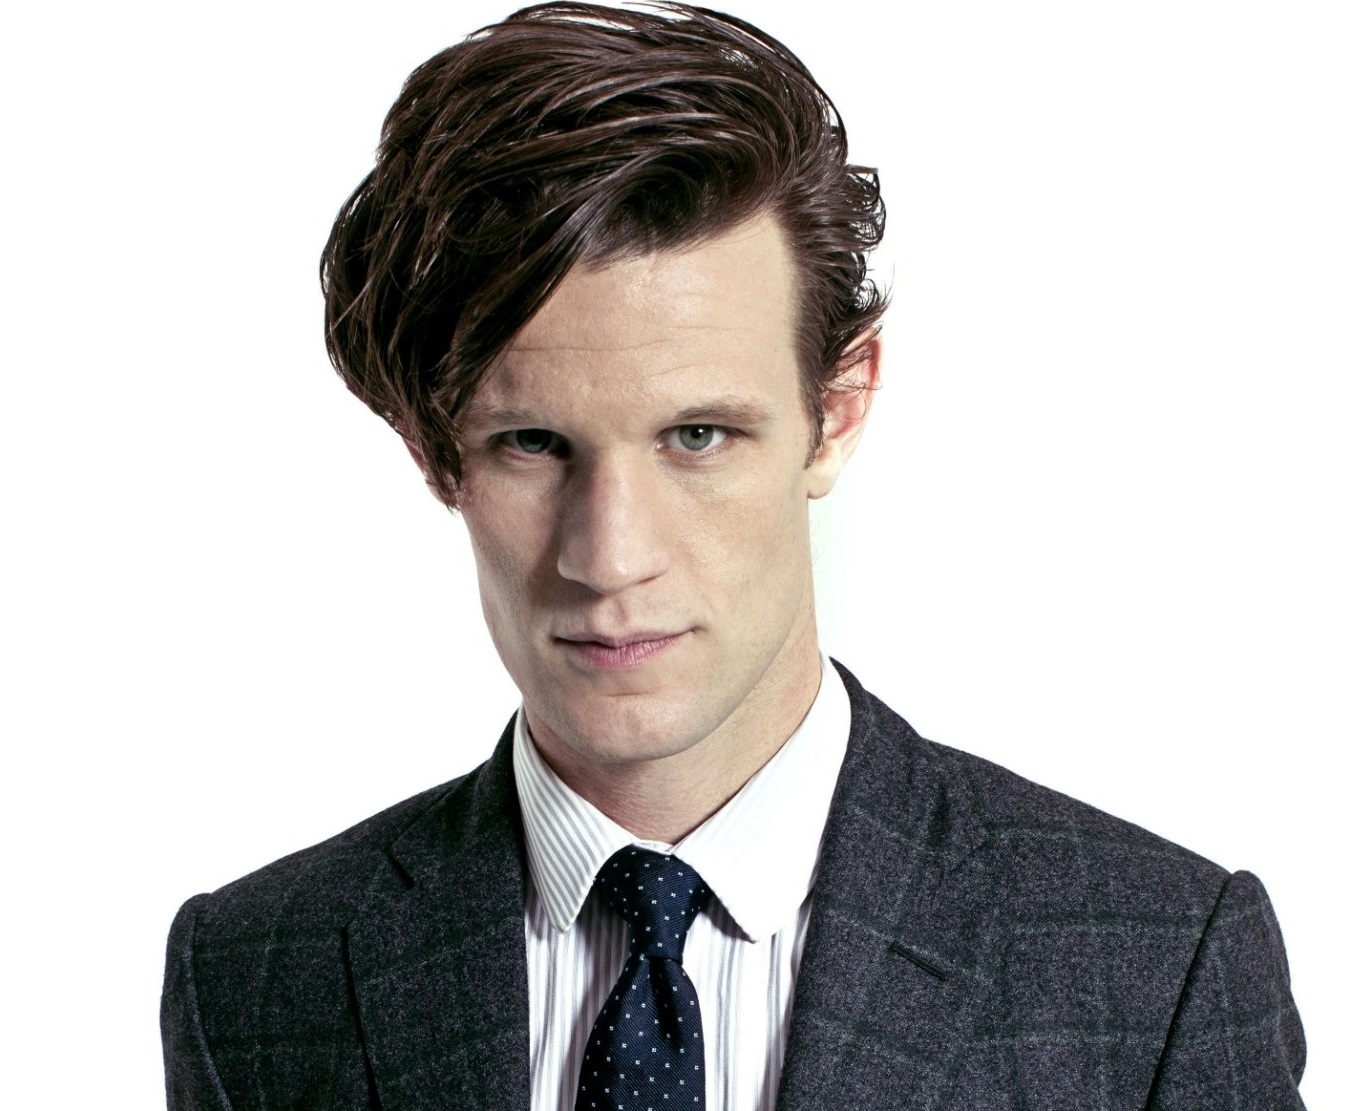 Matt smith cast in ‘pride and prejudice and zombies’